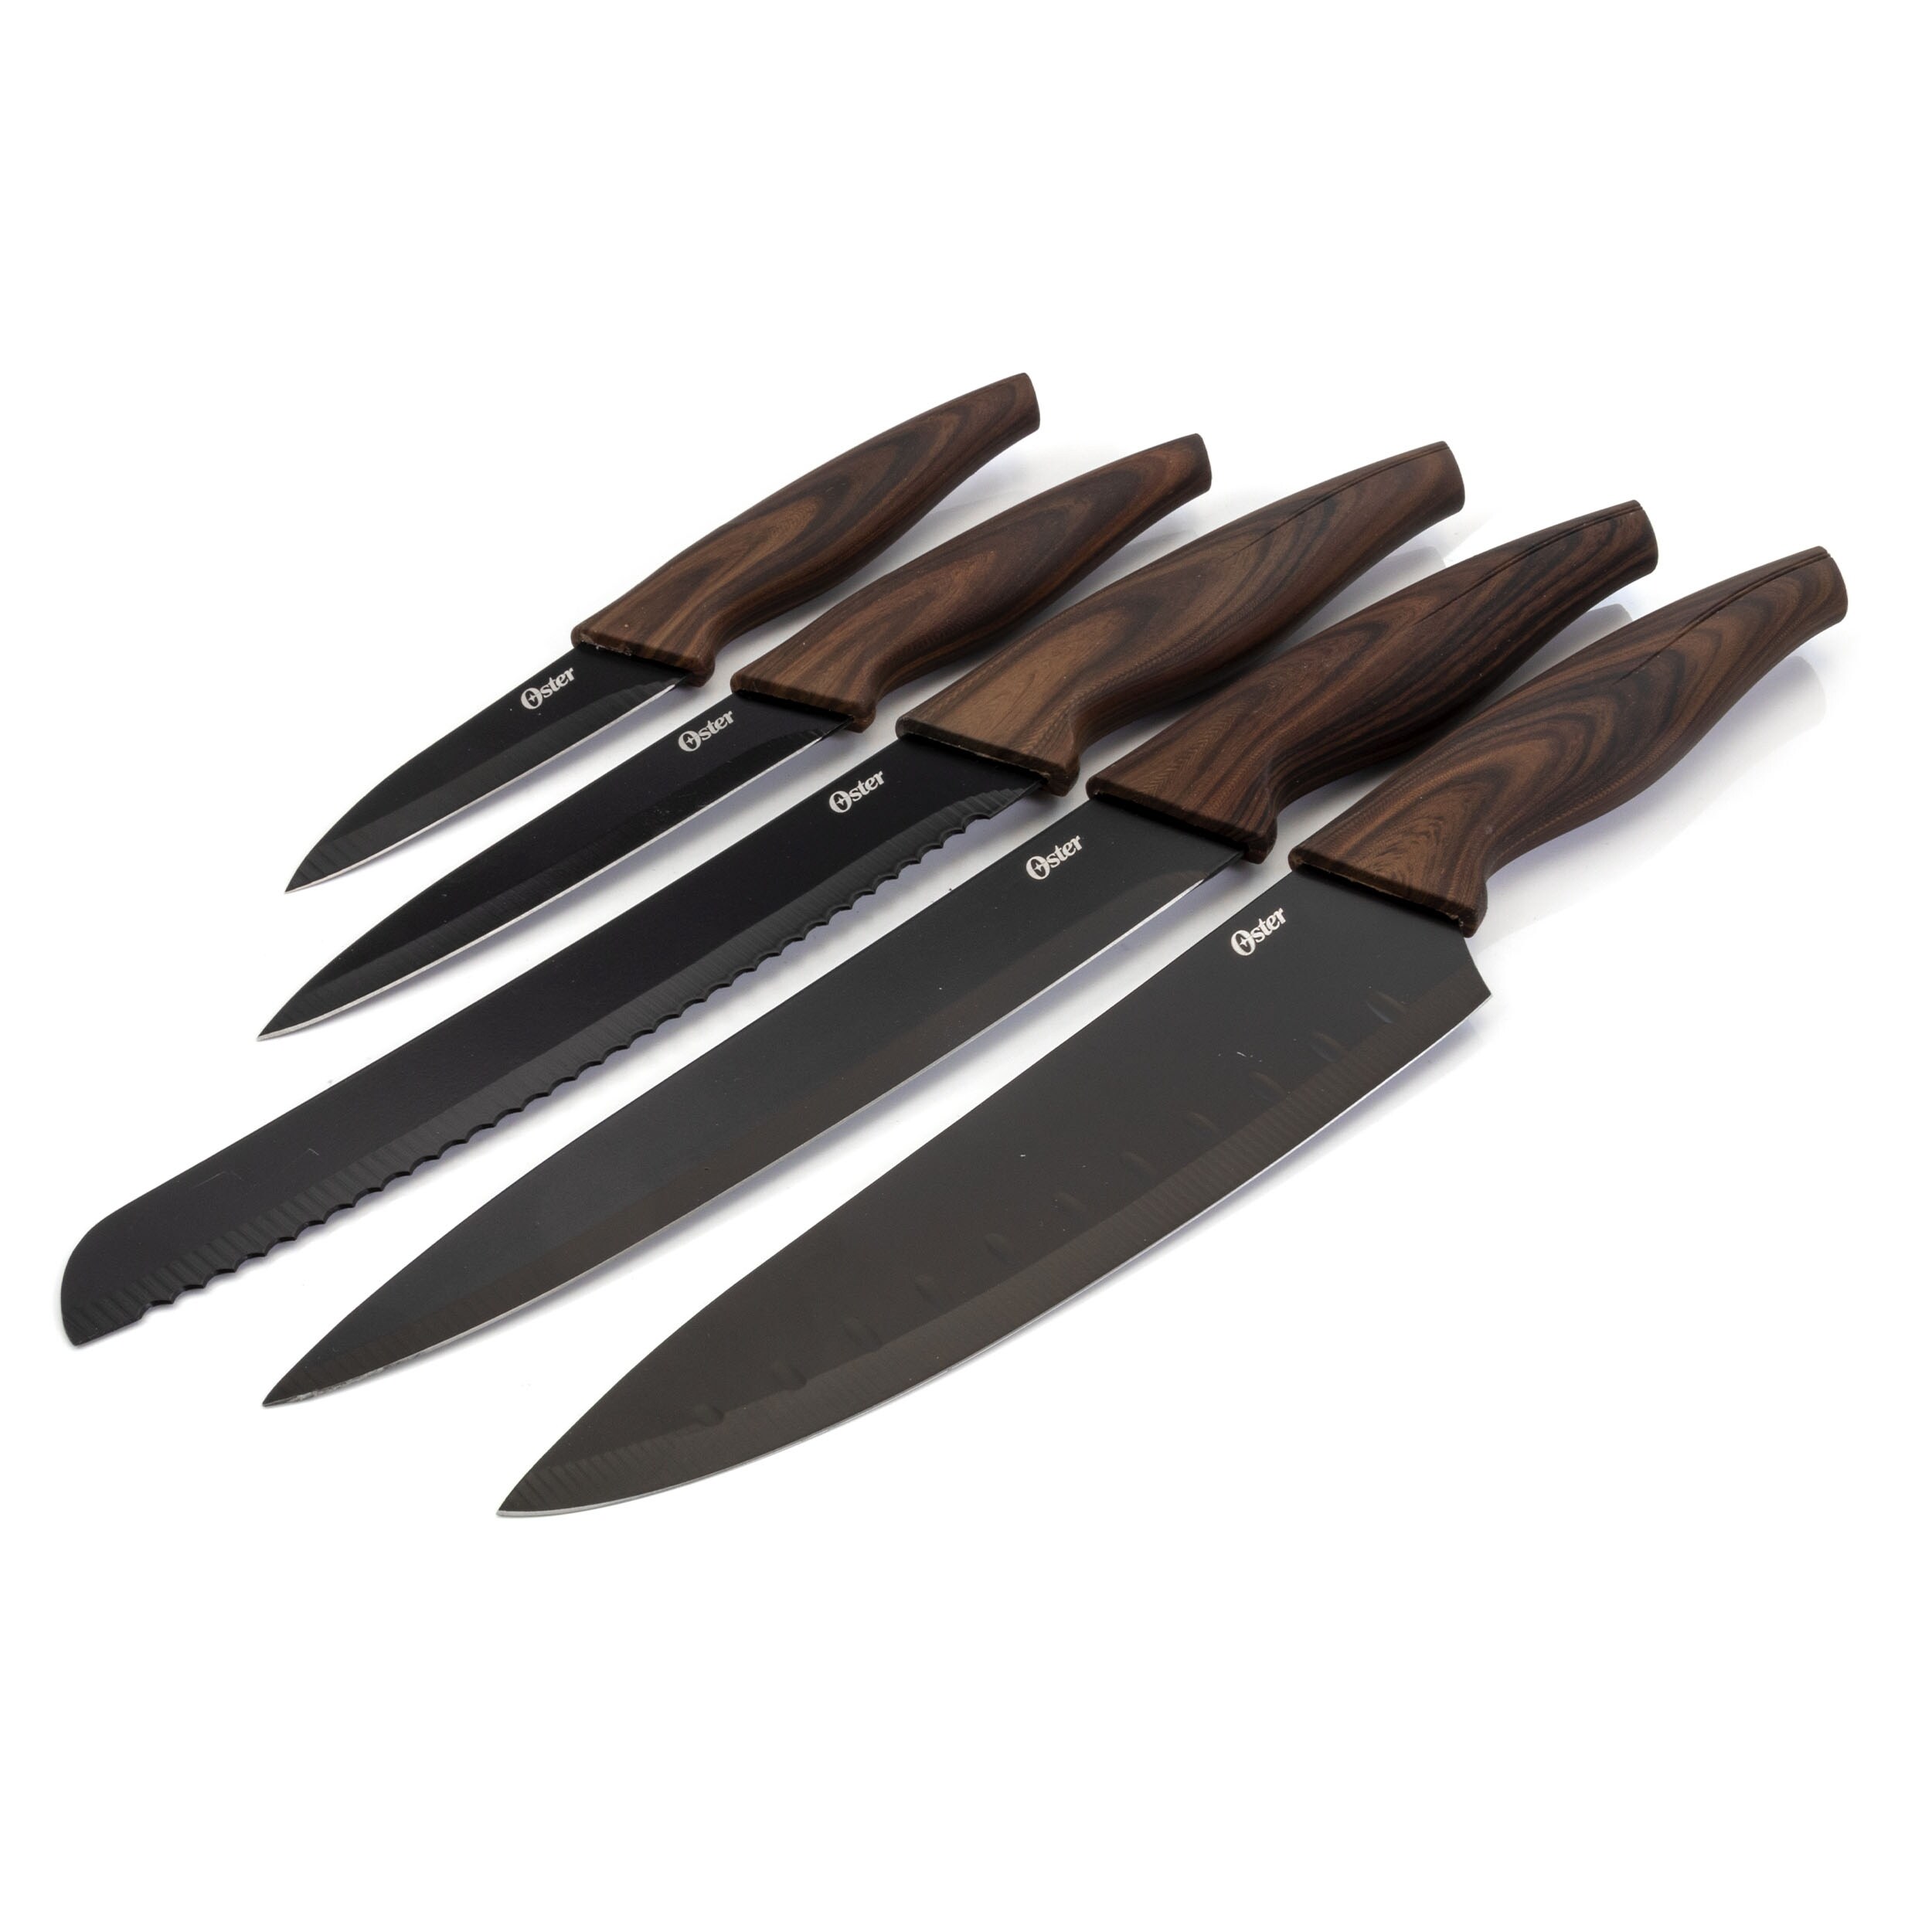 https://ak1.ostkcdn.com/images/products/is/images/direct/0343c7fee161e8fed15eb61ae0419b0b2352a465/Oster-Godfrey-5-Piece-Stainless-Steel-Black-Cutlery-Set-with-Wood-Print-Handles.jpg